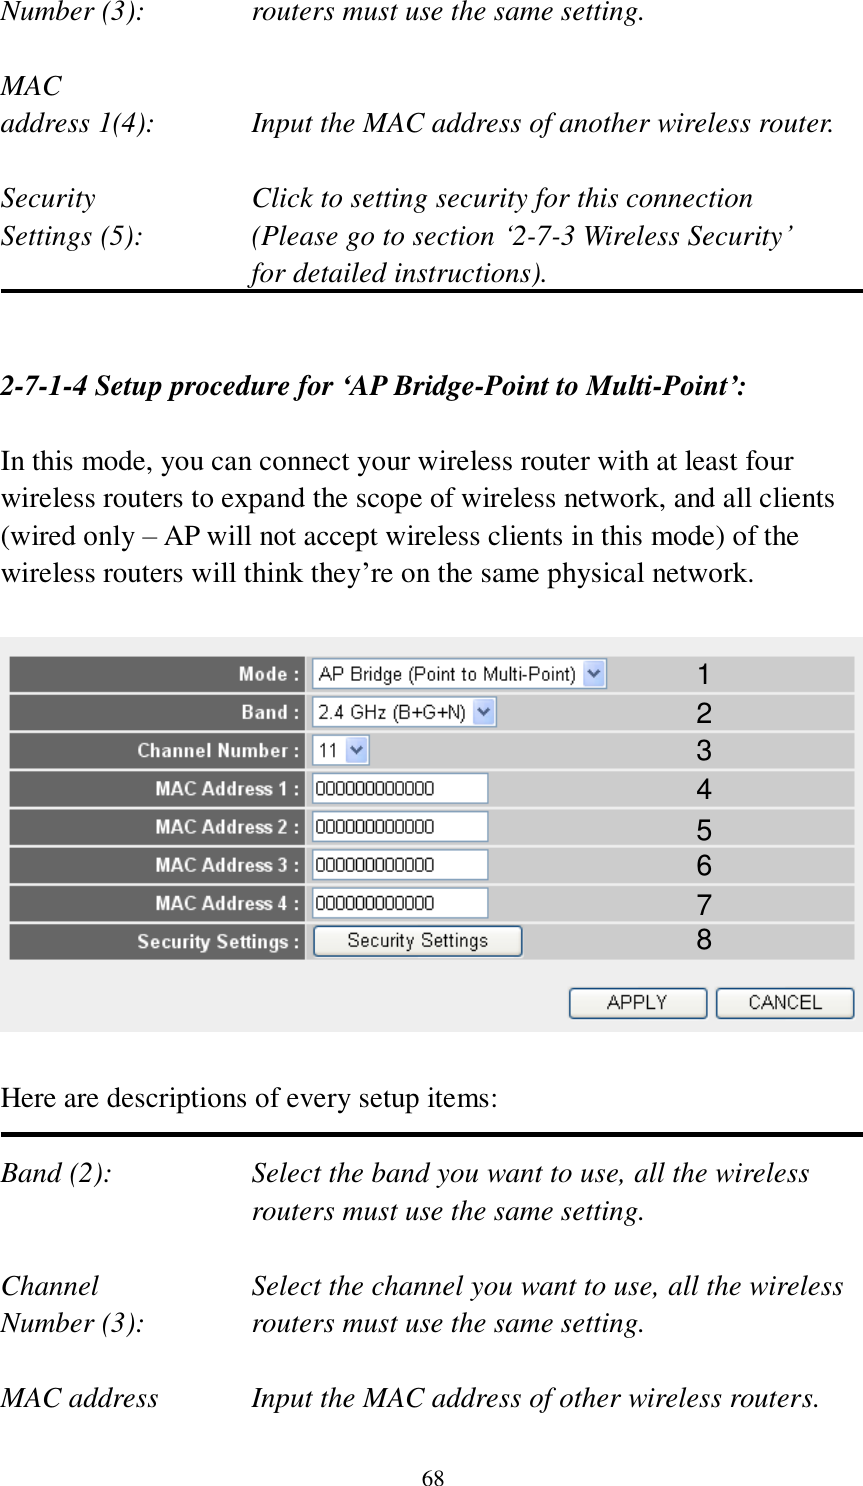 68 Number (3):  routers must use the same setting.  MAC address 1(4):  Input the MAC address of another wireless router.  Security    Click to setting security for this connection Settings (5):  (Please go to section „2-7-3 Wireless Security‟   for detailed instructions).   2-7-1-4 Setup procedure for ‘AP Bridge-Point to Multi-Point’:  In this mode, you can connect your wireless router with at least four wireless routers to expand the scope of wireless network, and all clients (wired only – AP will not accept wireless clients in this mode) of the wireless routers will think they‟re on the same physical network.    Here are descriptions of every setup items:  Band (2):  Select the band you want to use, all the wireless routers must use the same setting.  Channel  Select the channel you want to use, all the wireless Number (3):  routers must use the same setting.  MAC address    Input the MAC address of other wireless routers. 1 2 3 4 5 6 7 8 